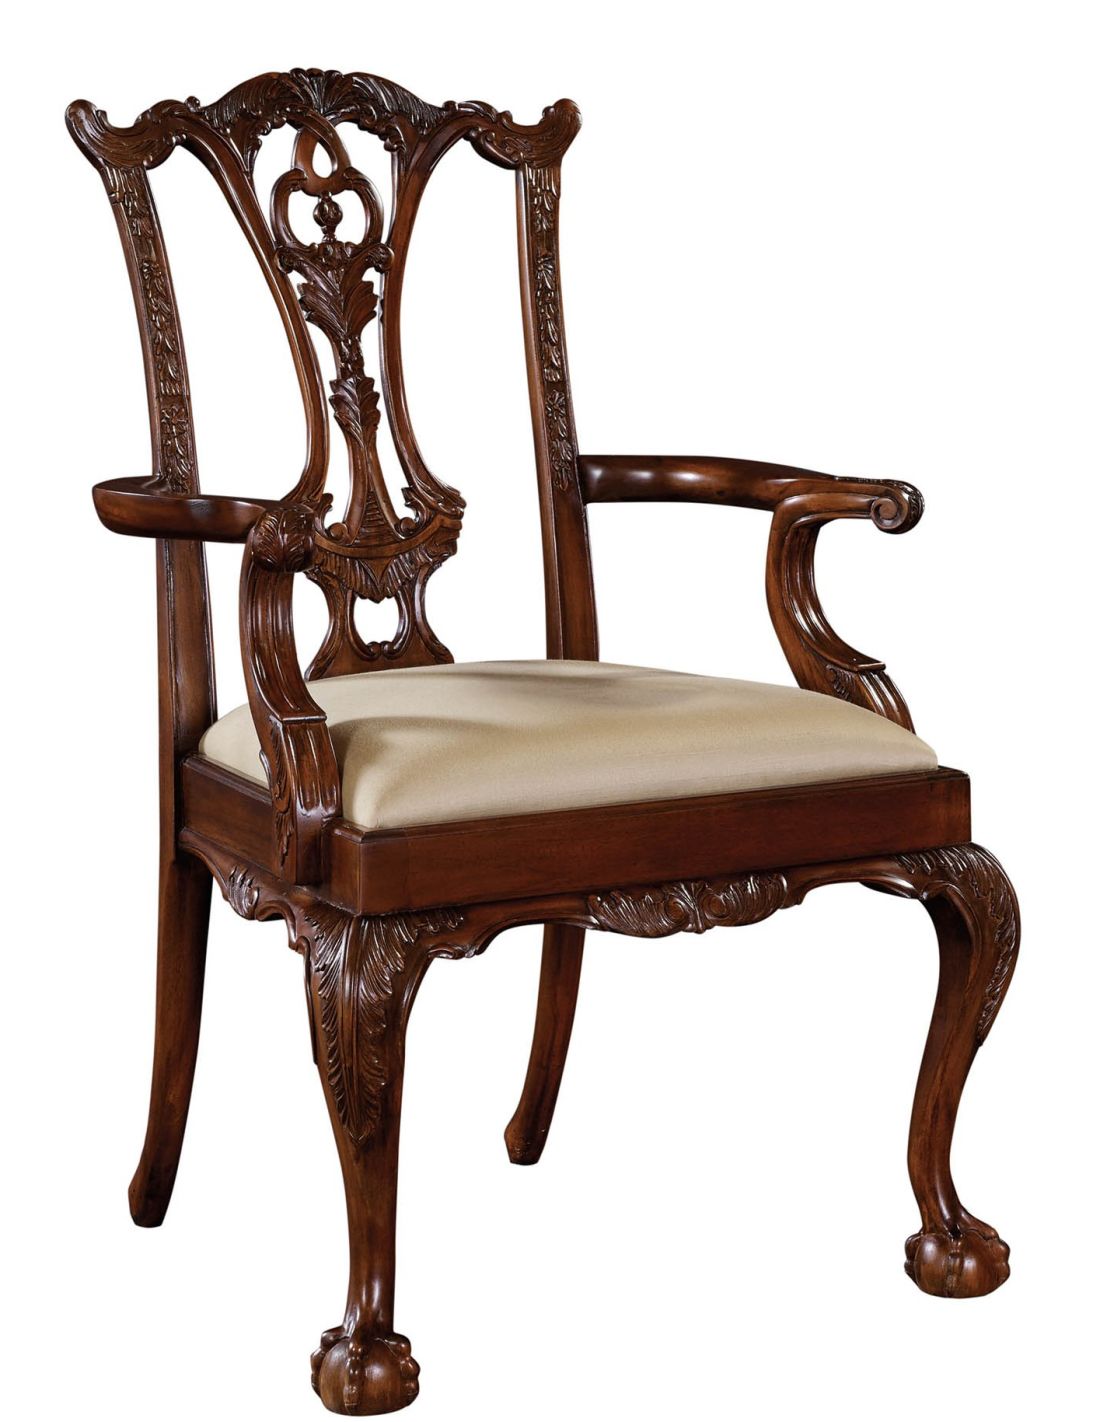 https://bernadettelivingston.com/23345-thickbox_default/ball-and-claw-foot-dining-chairs-high-end-solid-mahogany-44.jpg